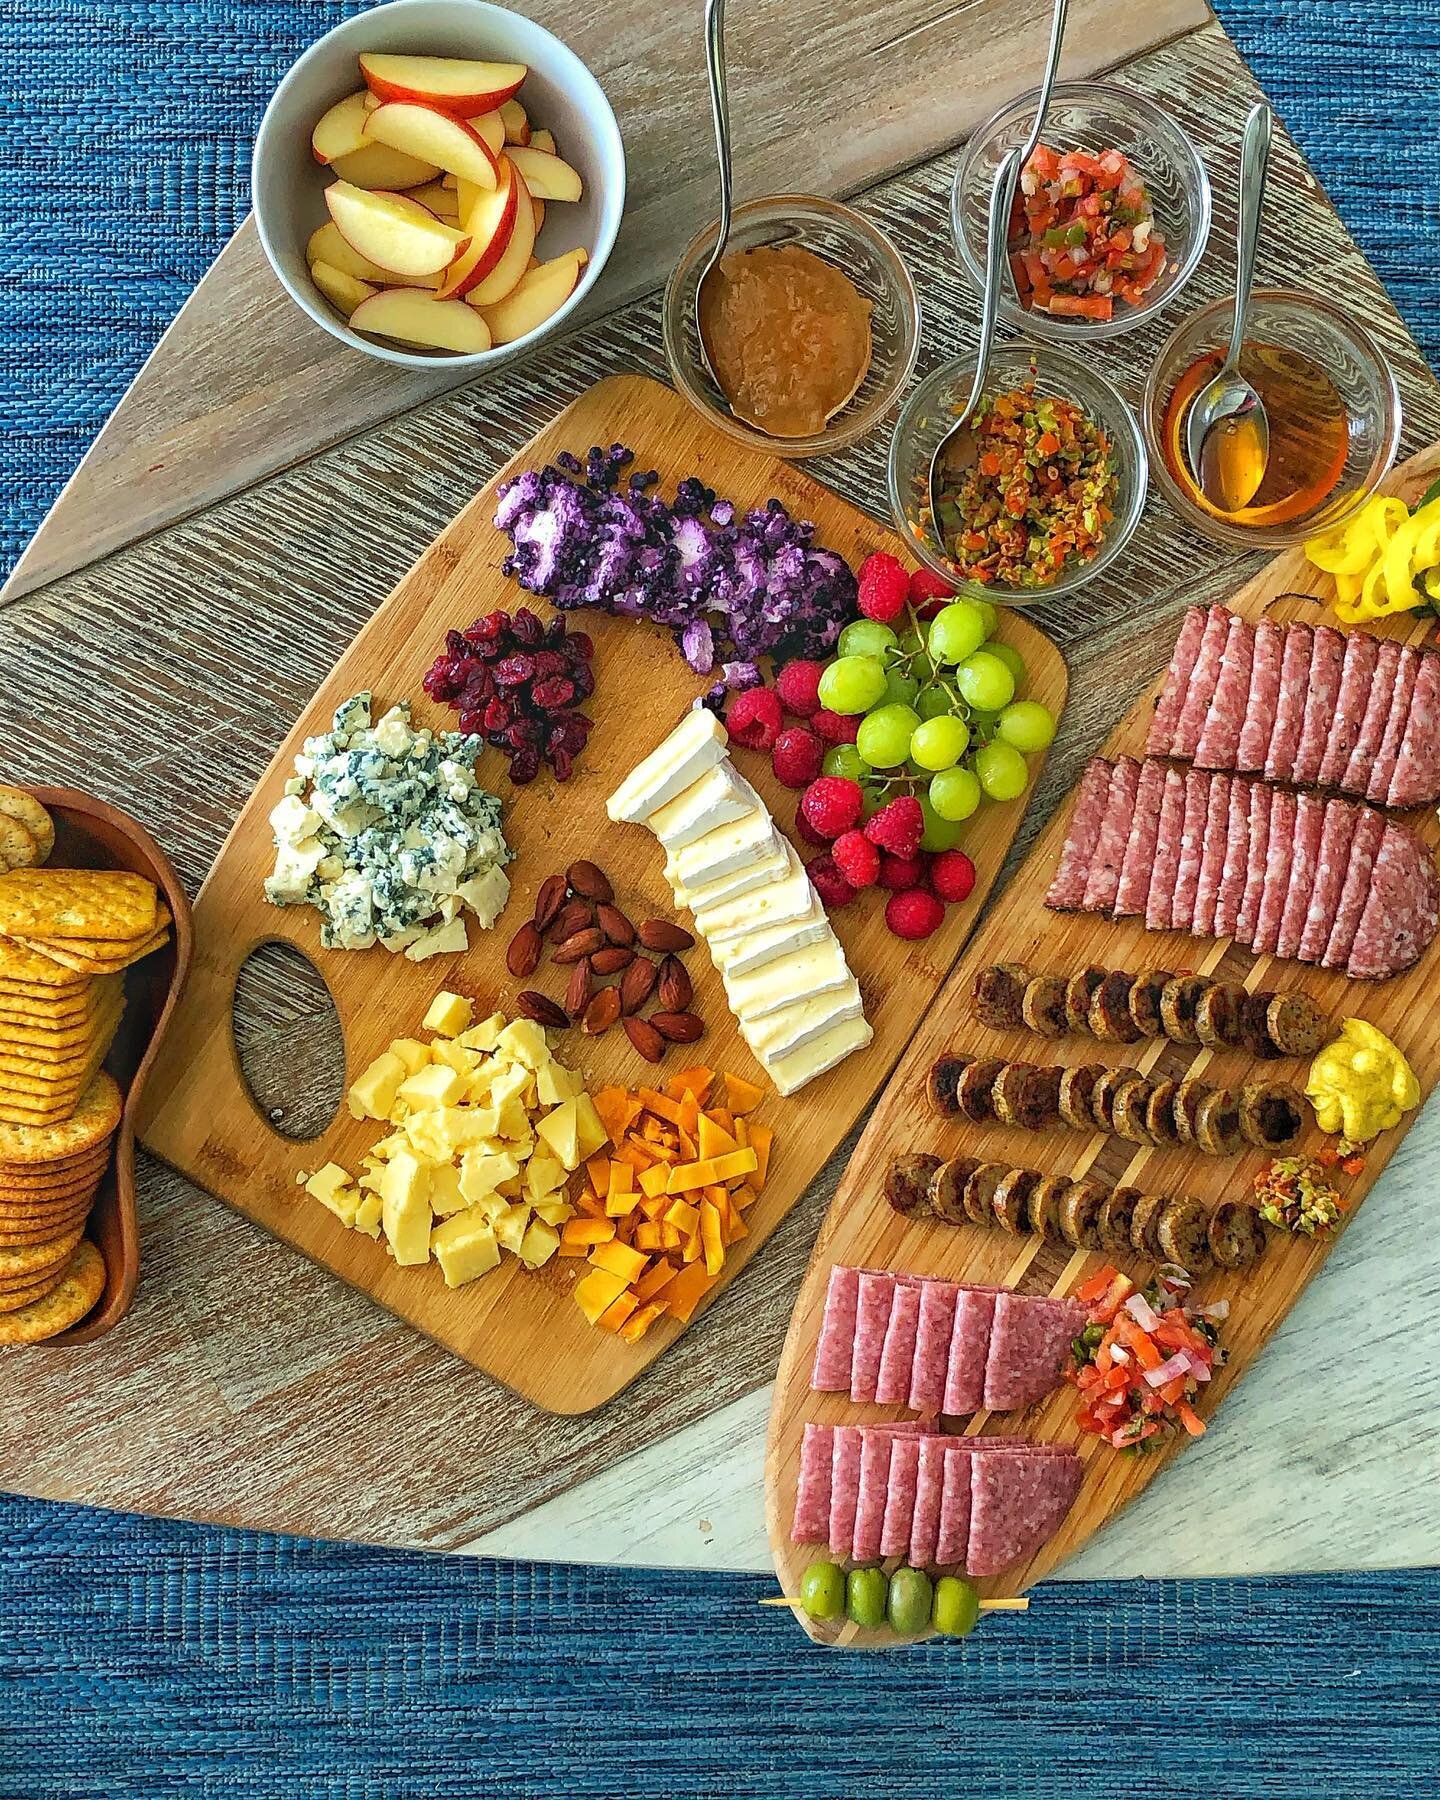 The Absolute Best Charcuterie Boards for your holiday